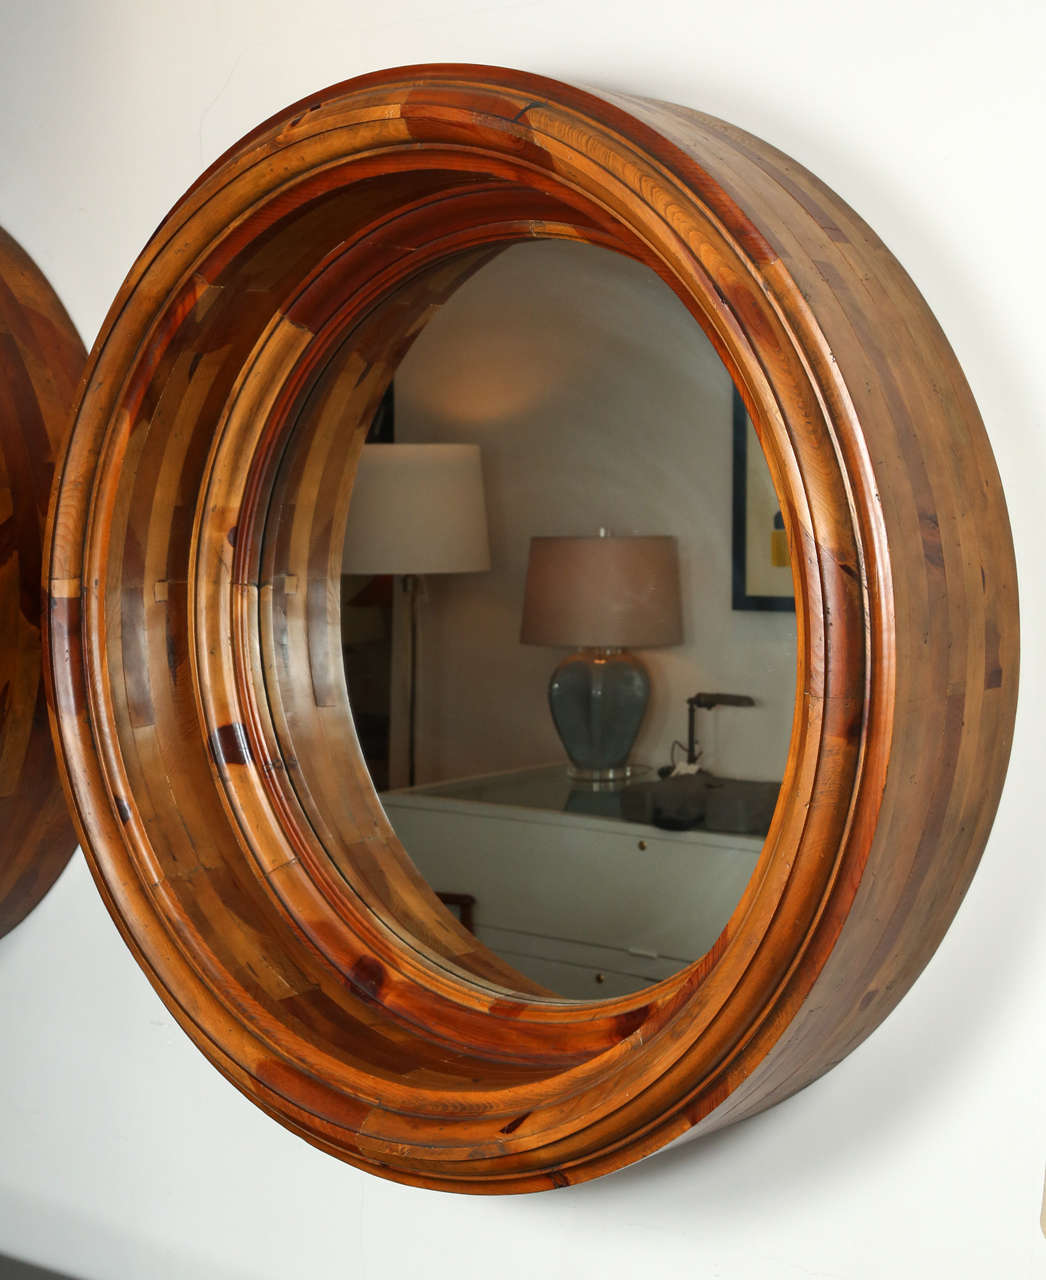 Wonderful pair of monumental scale porthole mirrors, framed in mottled oak. From the Ralph Lauren Home Collection, circa 1990s. Wonderful condition.

Overall diameter of the frame is 42.5